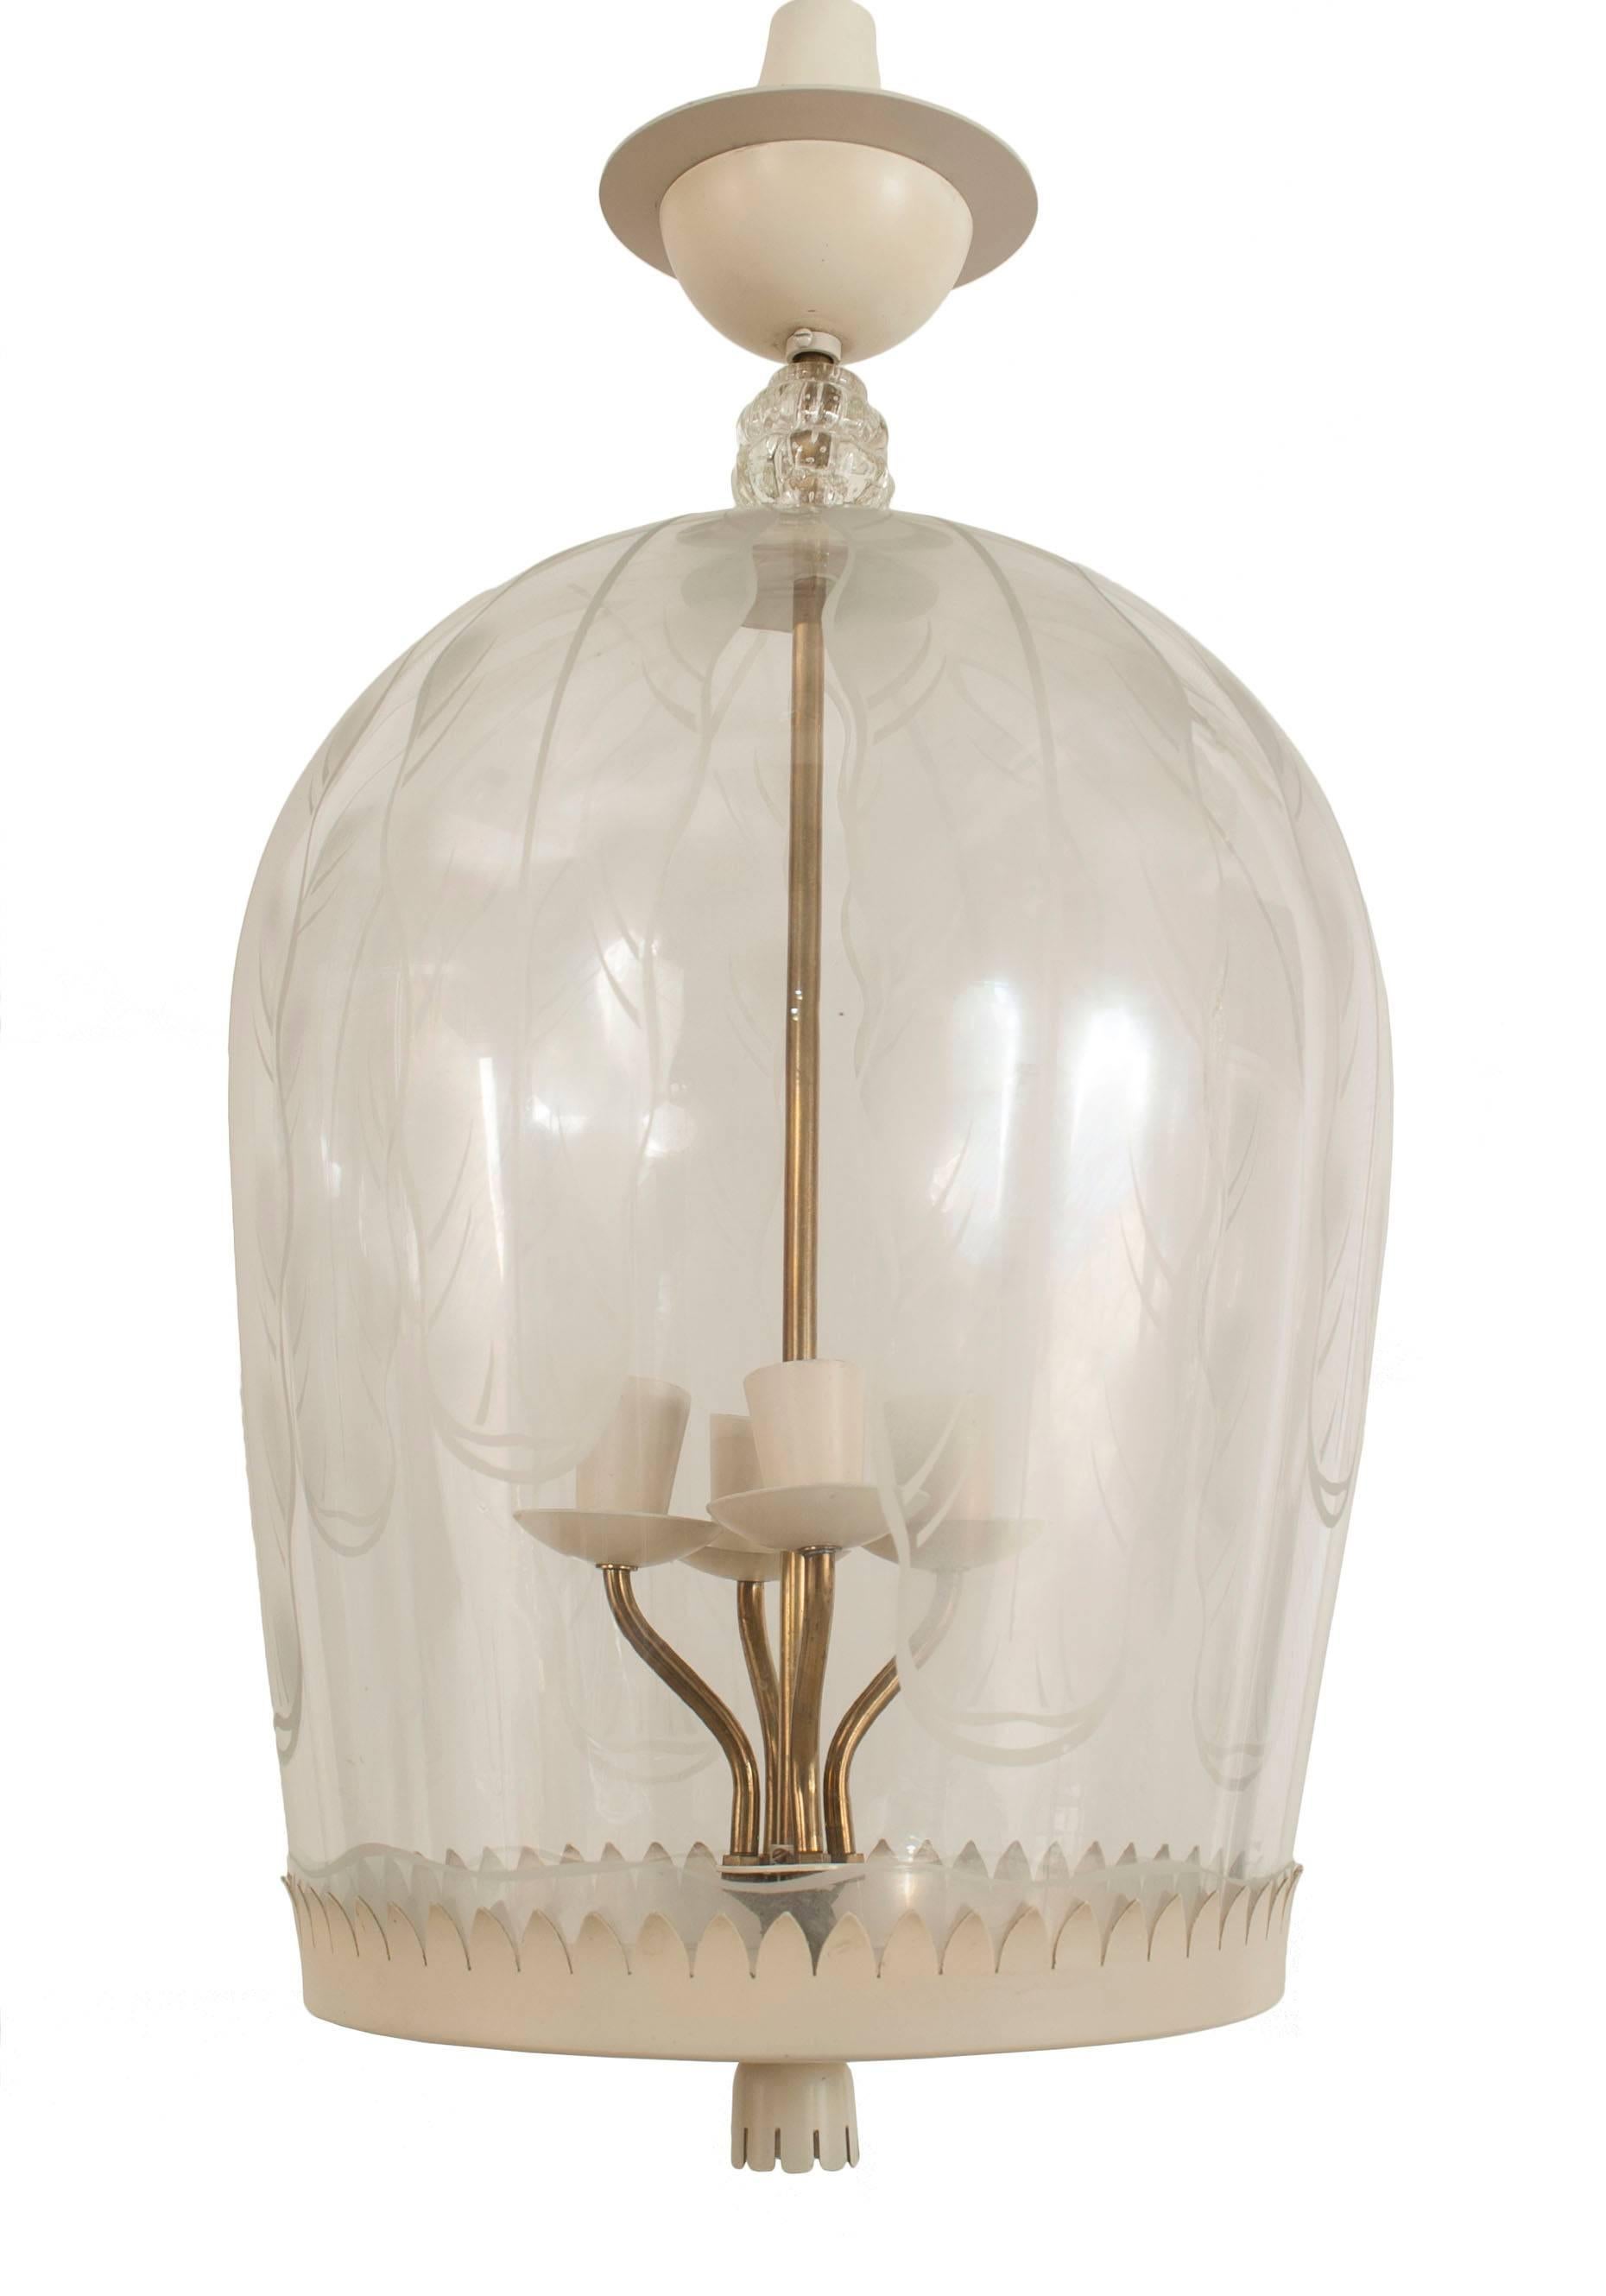 Italian 1940s clear glass dome form lantern with an etched design of leaves and a white metal painted and scalloped bottom with a finial.
